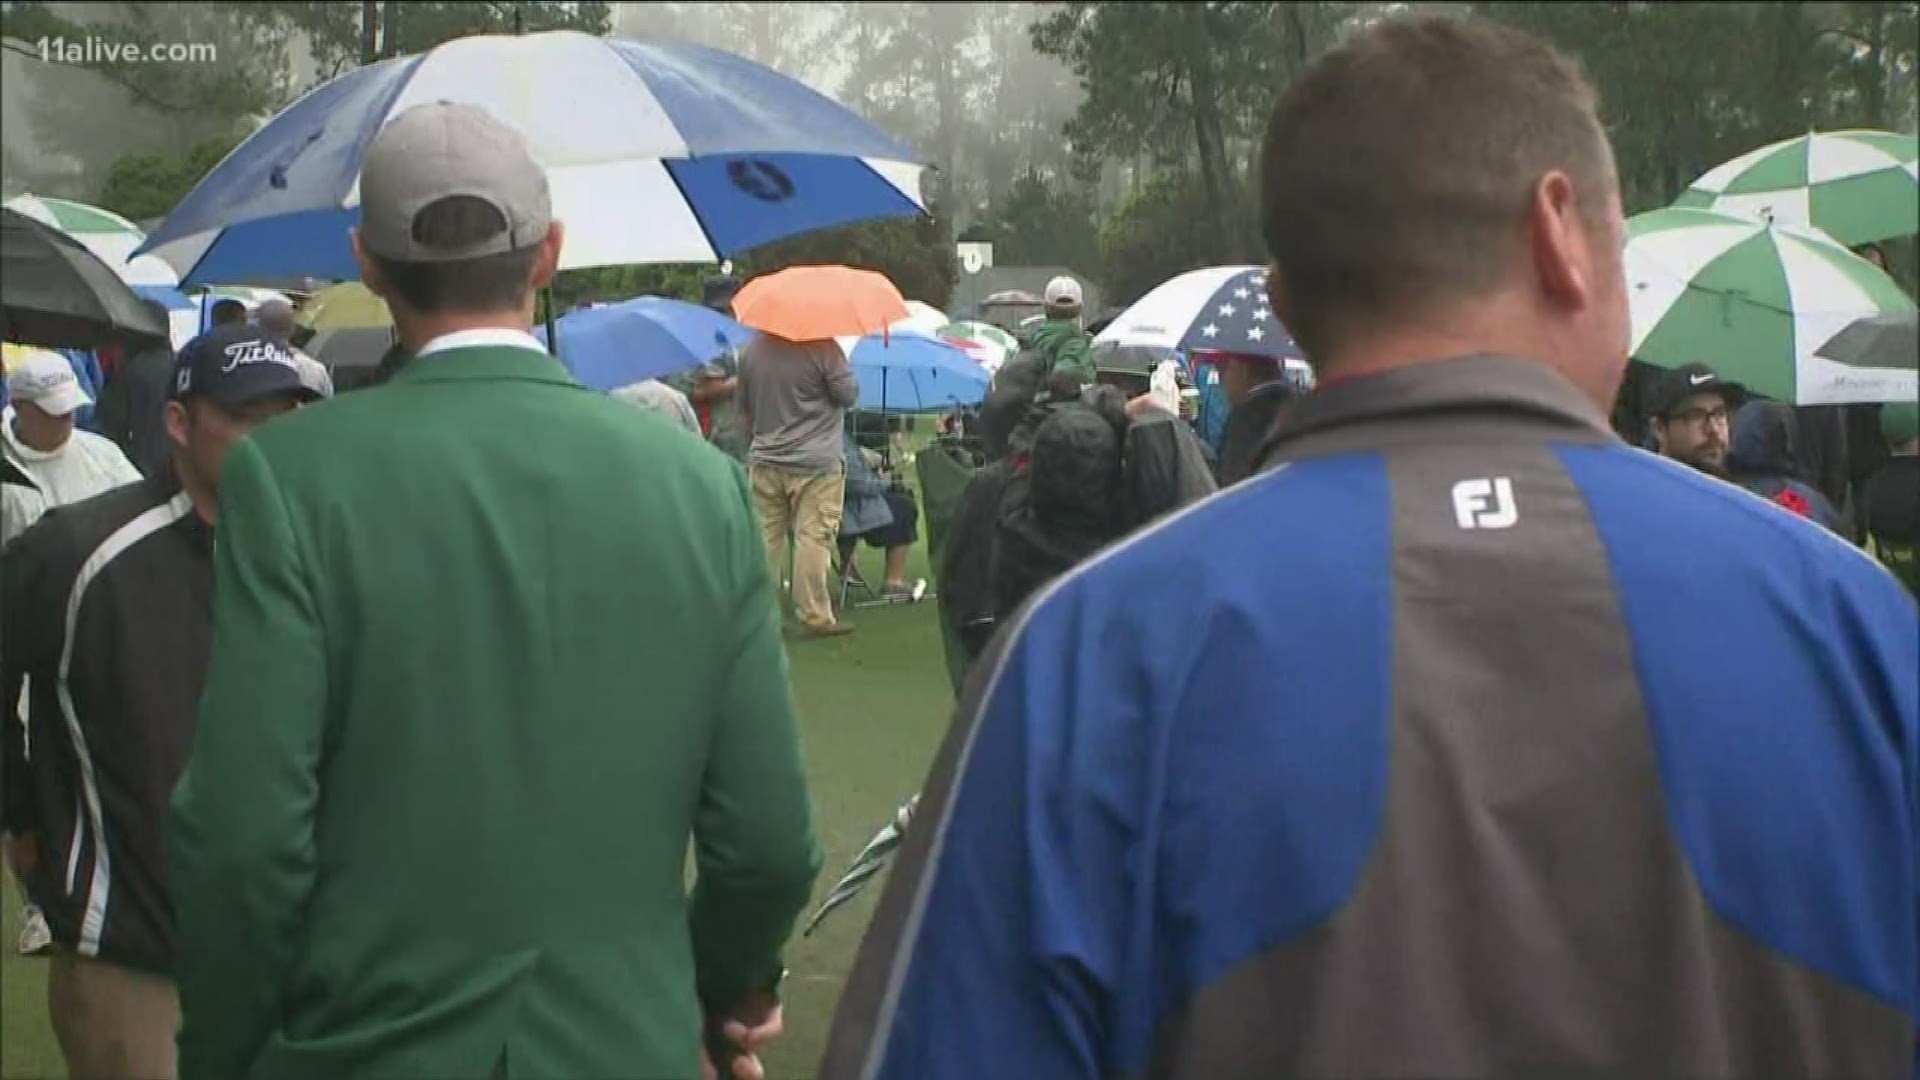 Players and patrons had to evacuate Augusta National due to the threat of lightning.